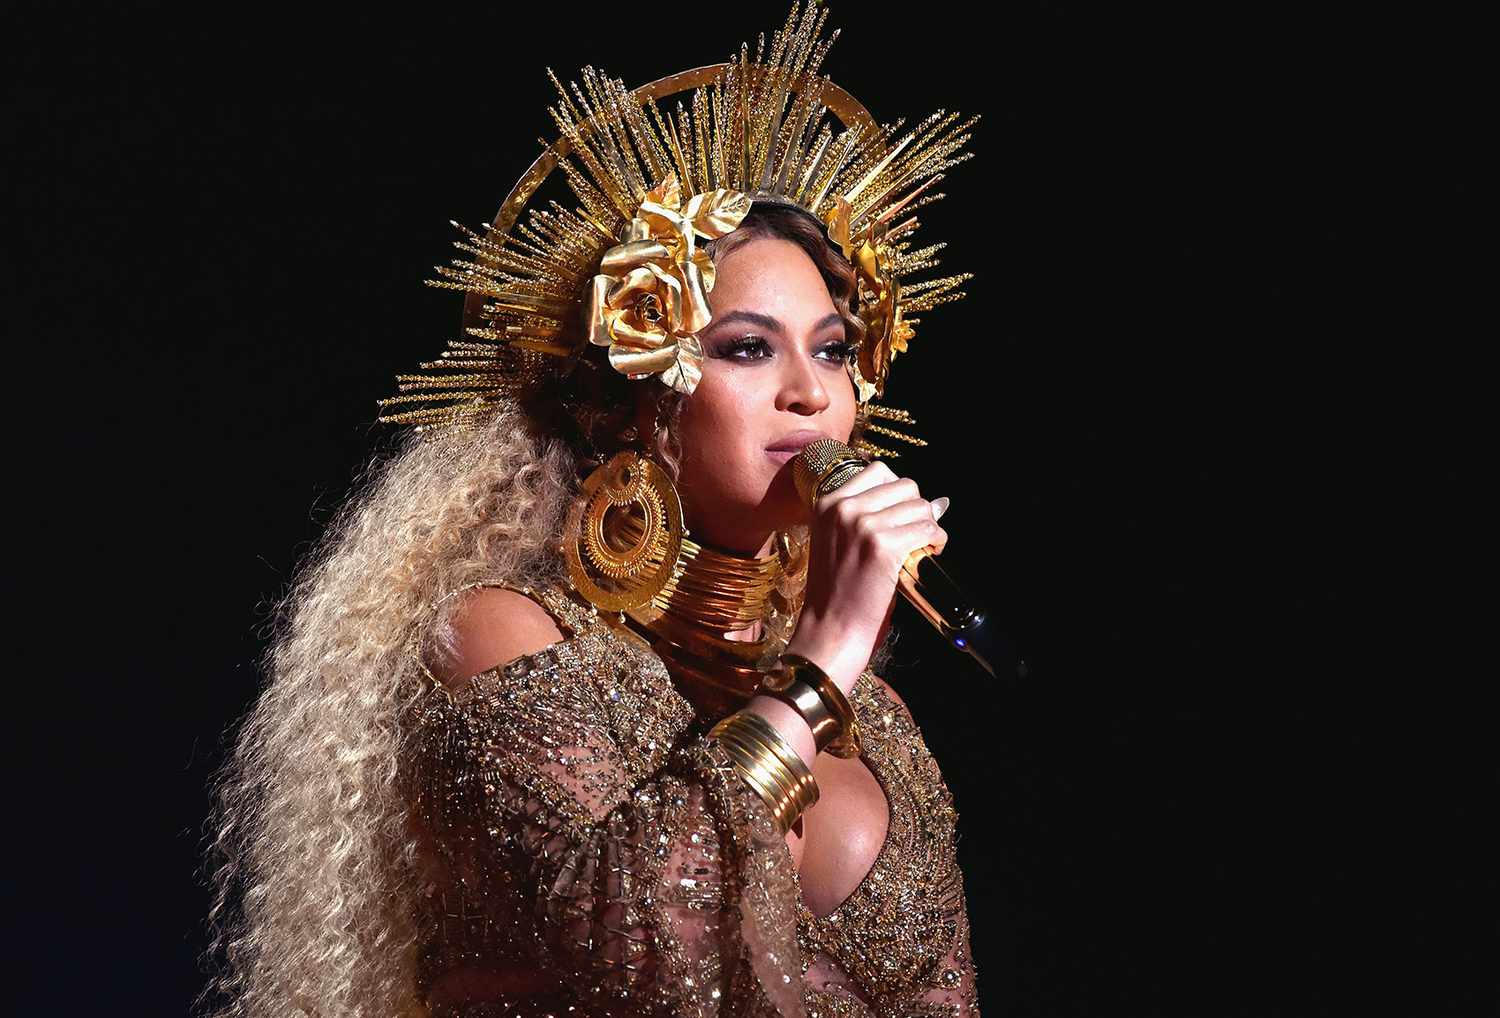 Beyonce at the 59th Grammy Awards Show